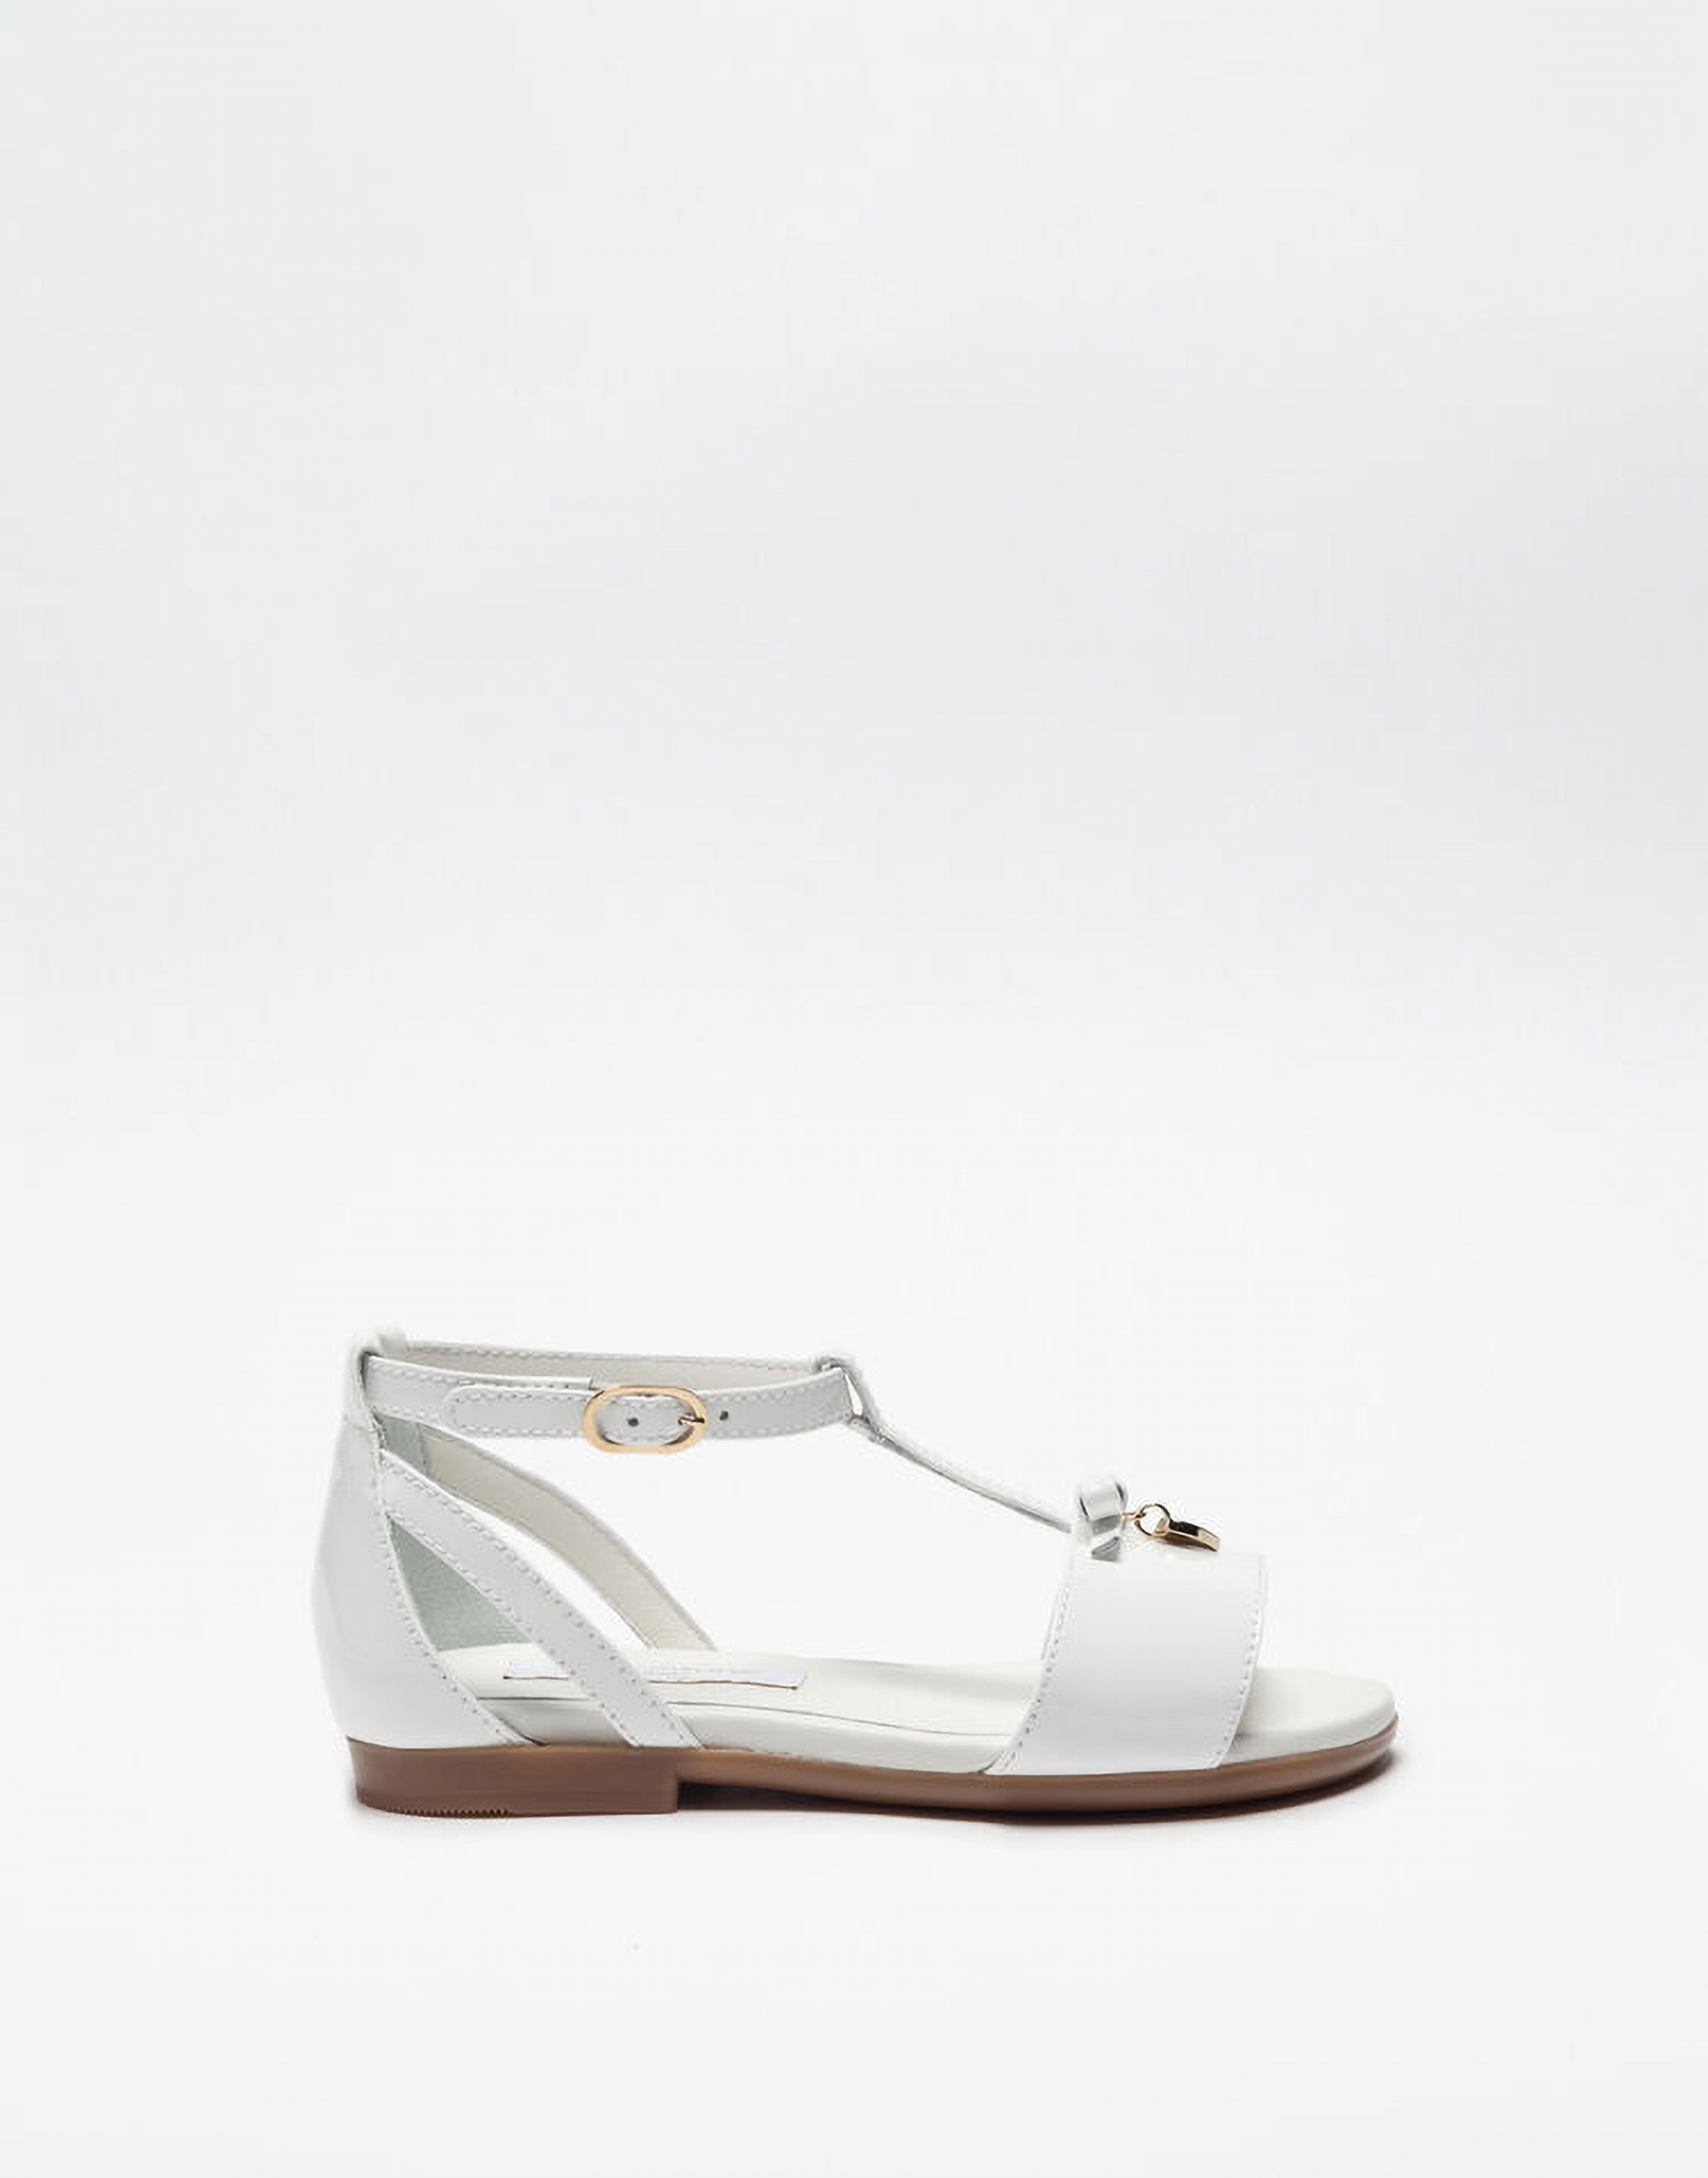 T-strap patent leather sandal in White